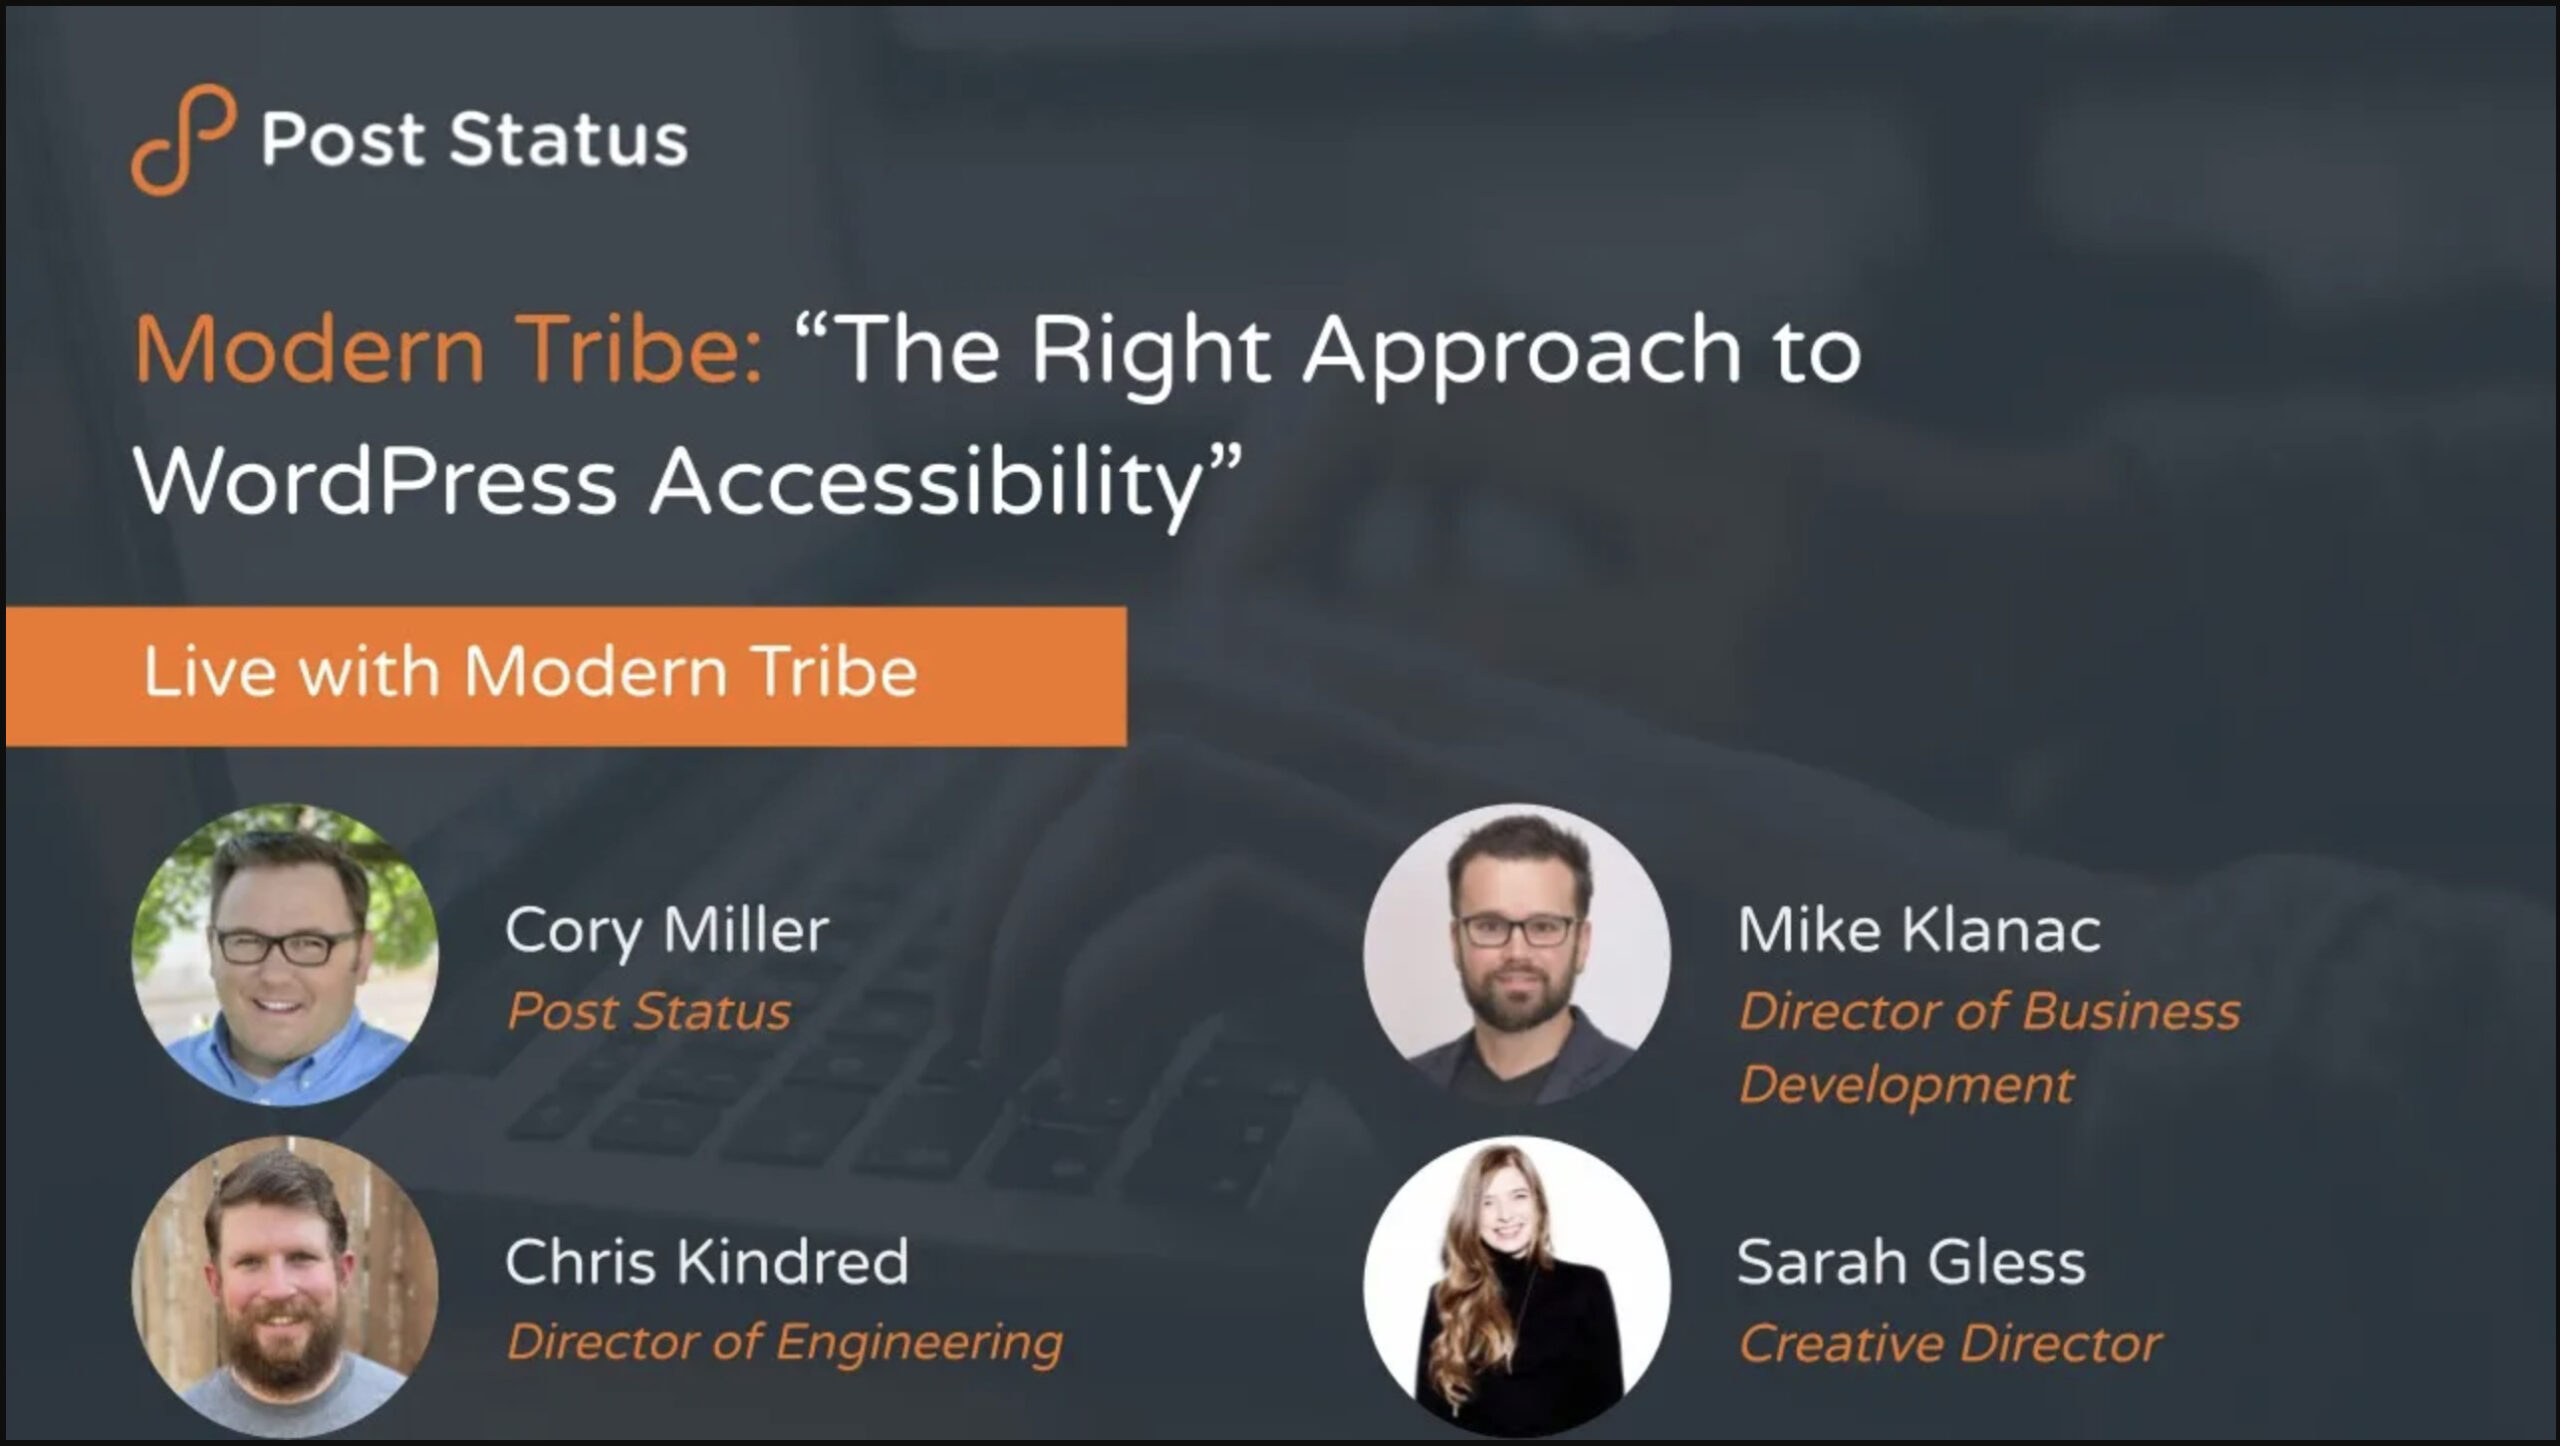 Modern Tribe: The Right Approach to Accessibility"